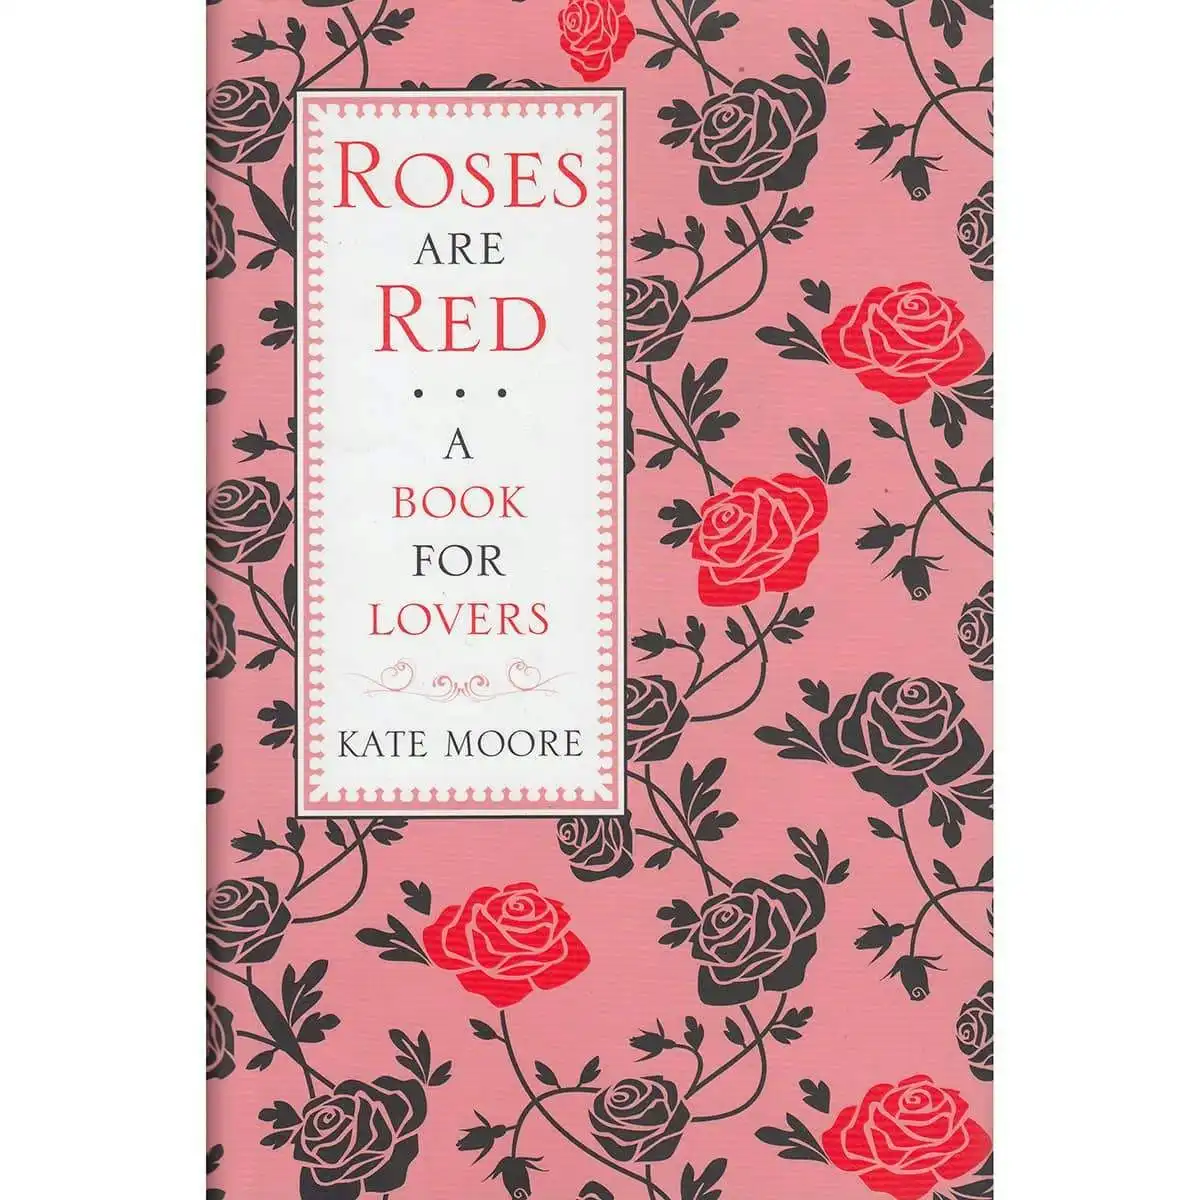 Roses Are Red Bk For Lovers - By Kate Moore